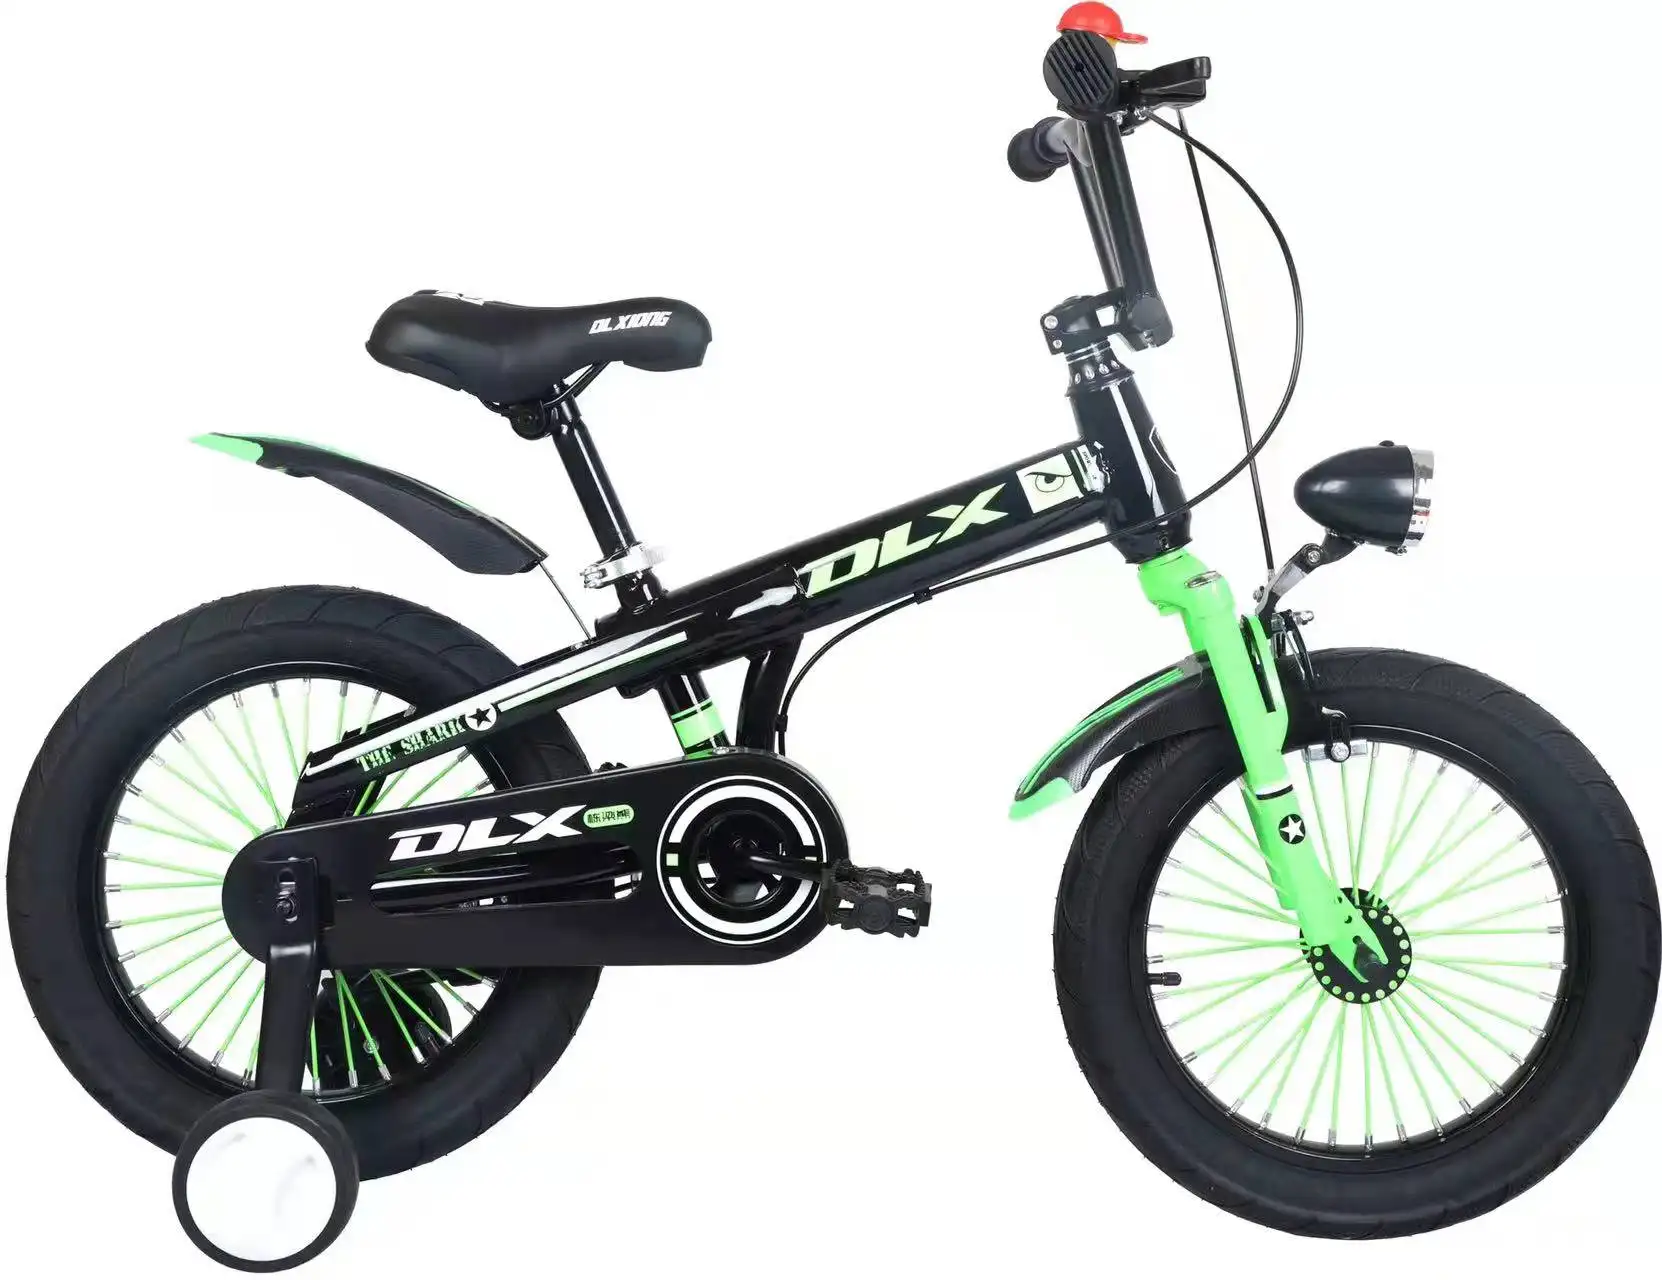 China Wholesale 16 18 20 Inch Mountain Bike Good Quality Students' Ride On Bicycle MTB Cycle